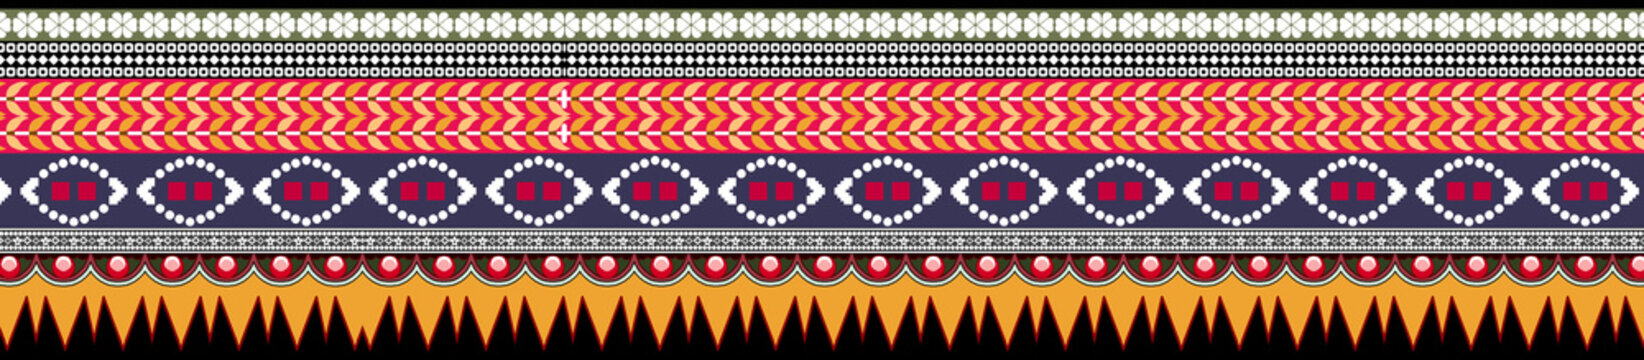 Beautiful Geometric Ethnic style border design handmade artwork with Design for fashion , fabric, textile, wallpaper, cover, web , wrapping and all prints